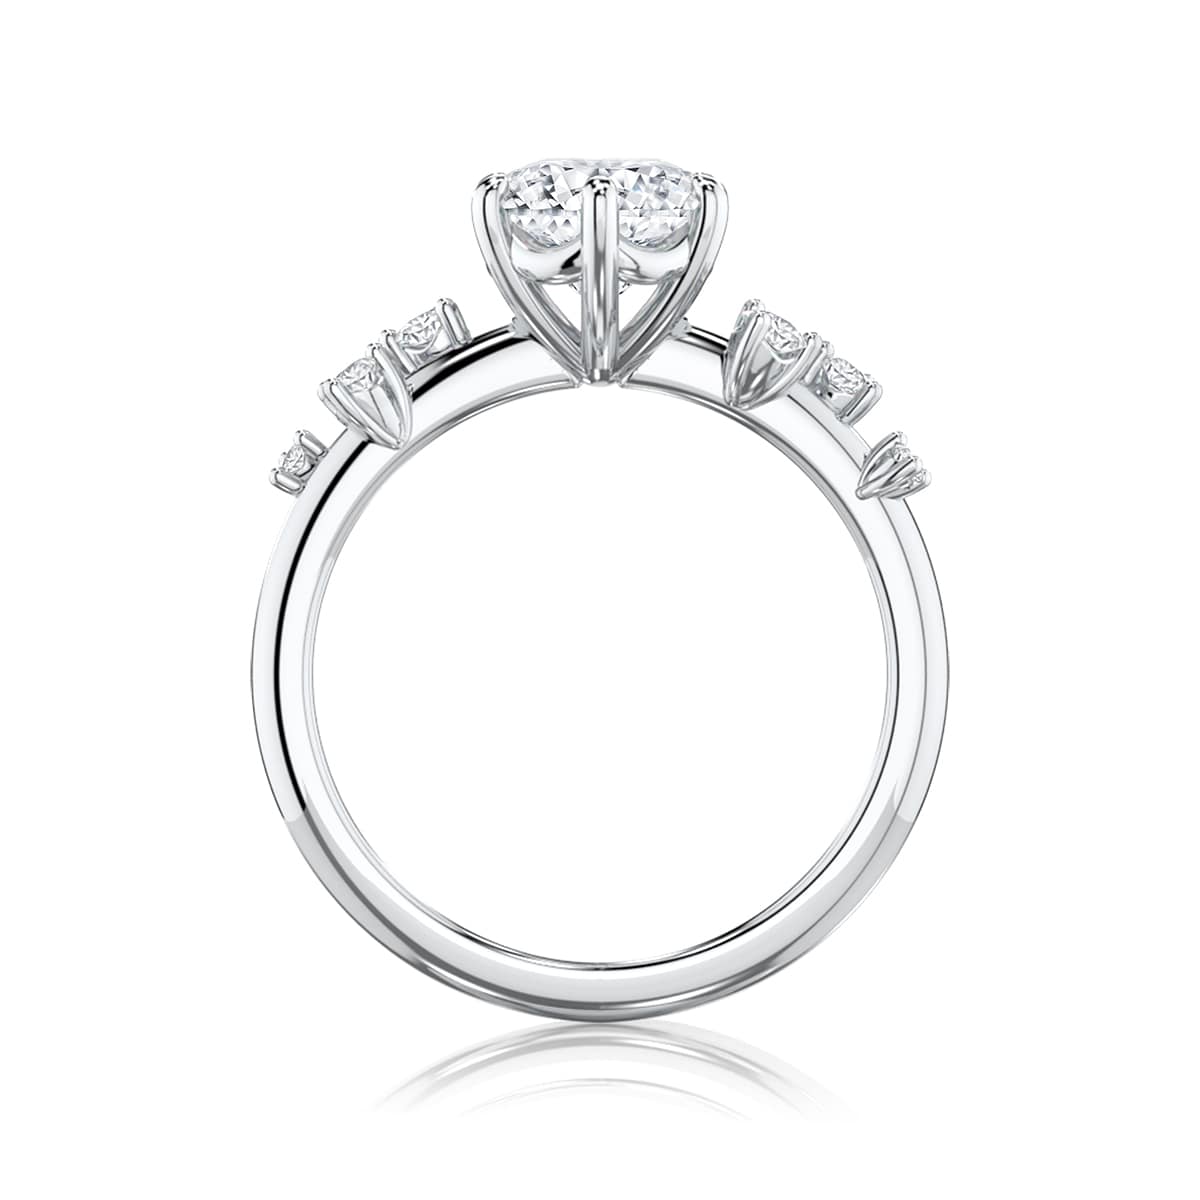 Twilight White Gold Round Diamond Engagement Ring with Side Stones